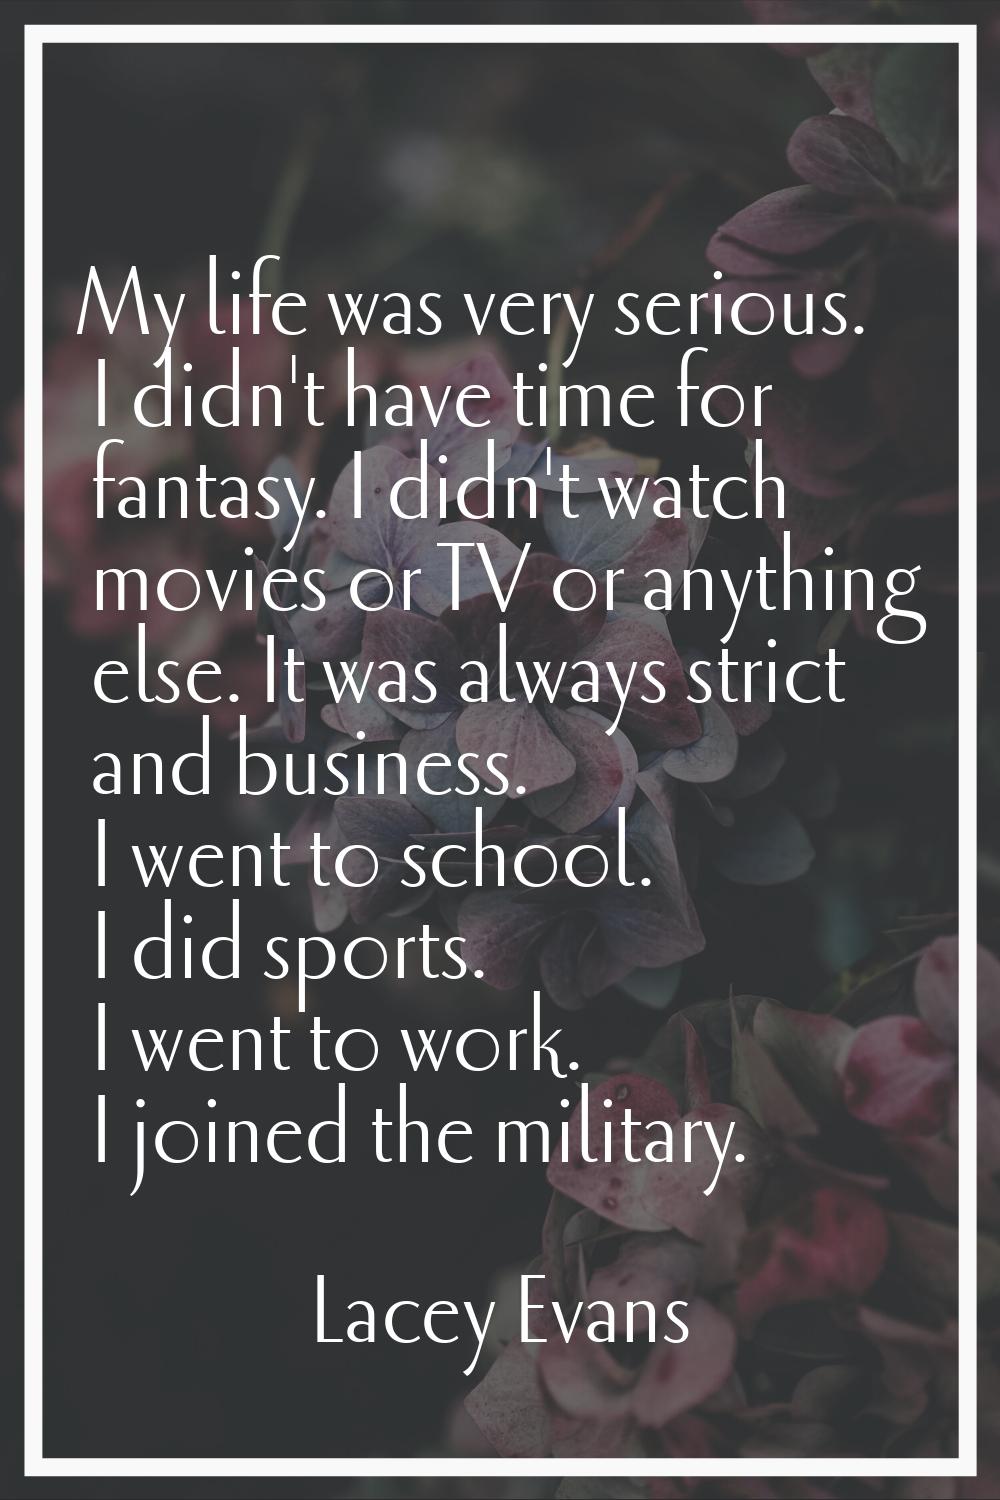 My life was very serious. I didn't have time for fantasy. I didn't watch movies or TV or anything e